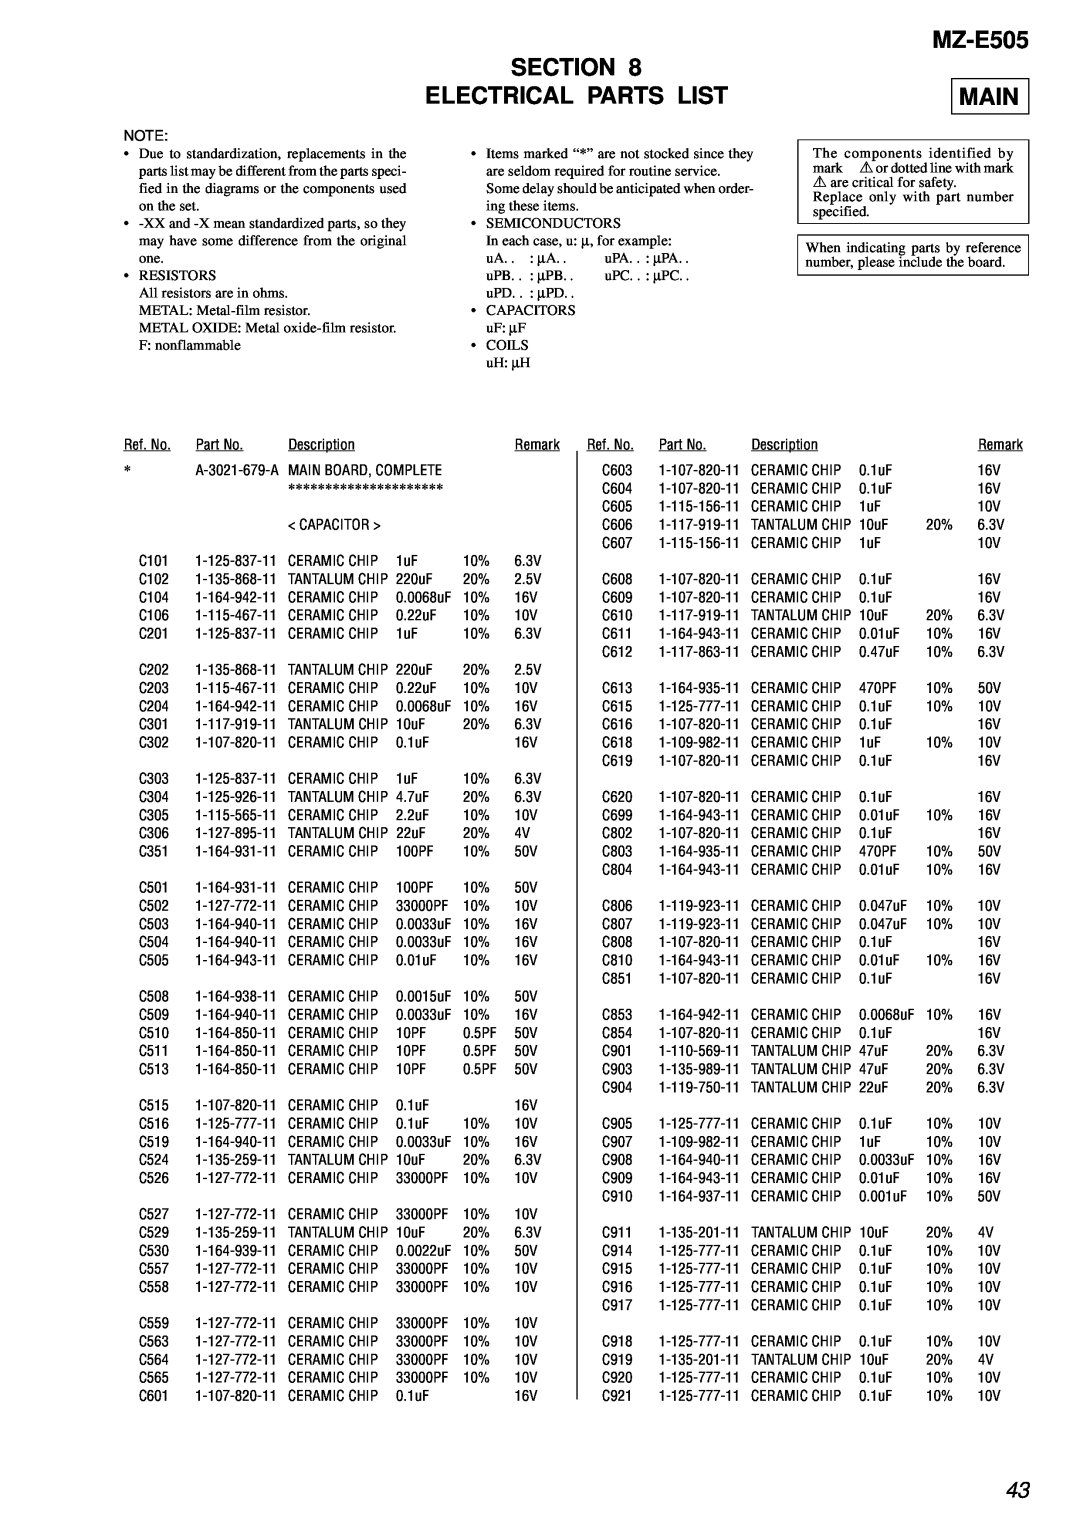 Sony service manual Section Electrical Parts List, MZ-E505 MAIN 